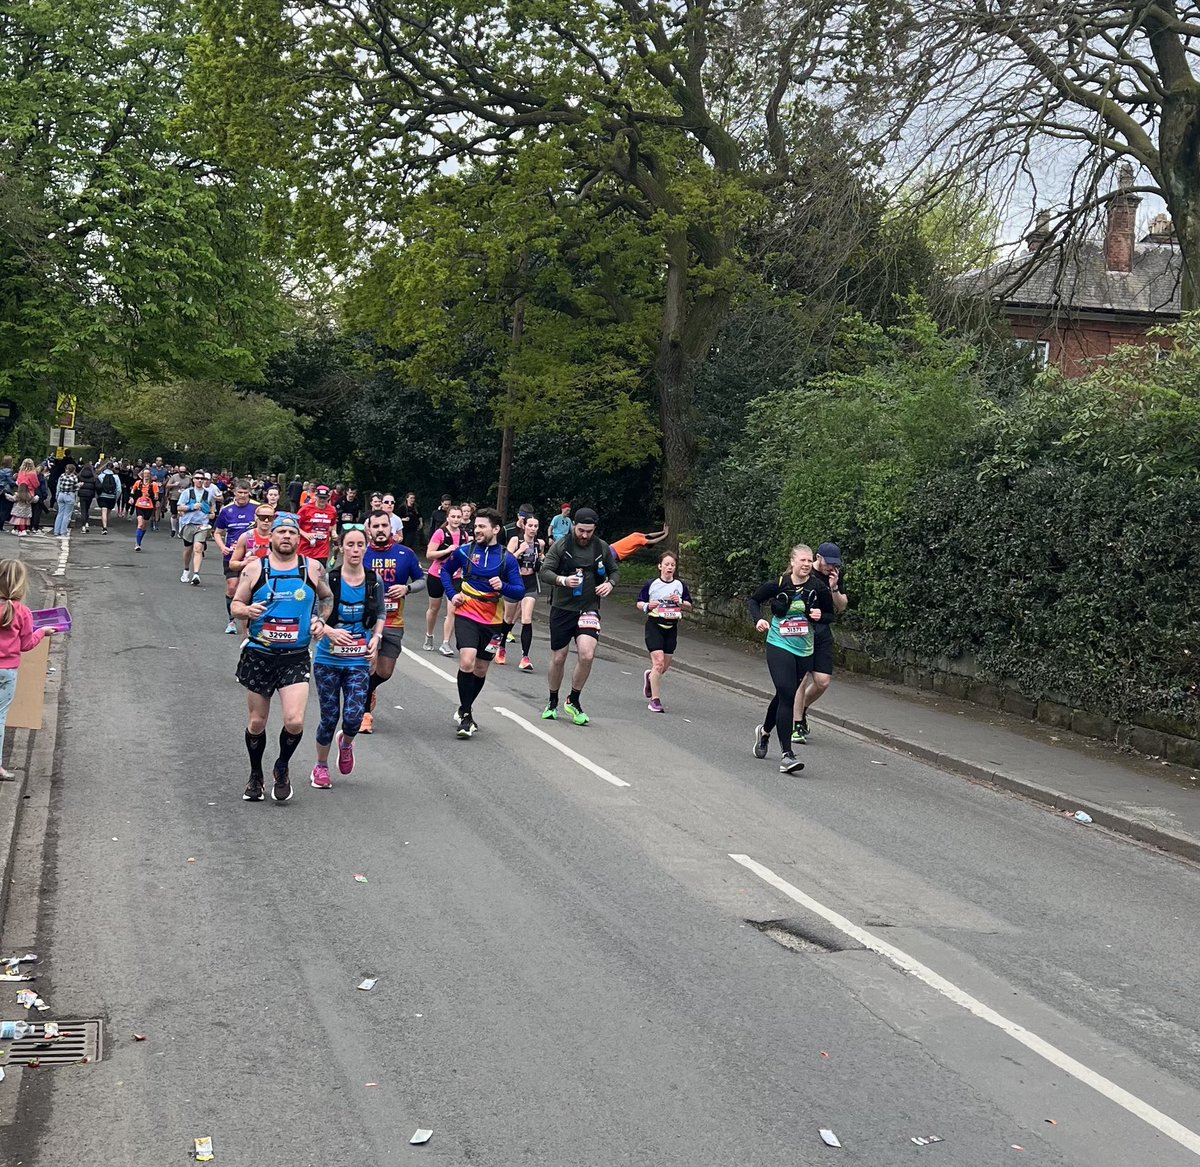 Proud of all of the runners today at #Manchestermarathon amazing achievement.